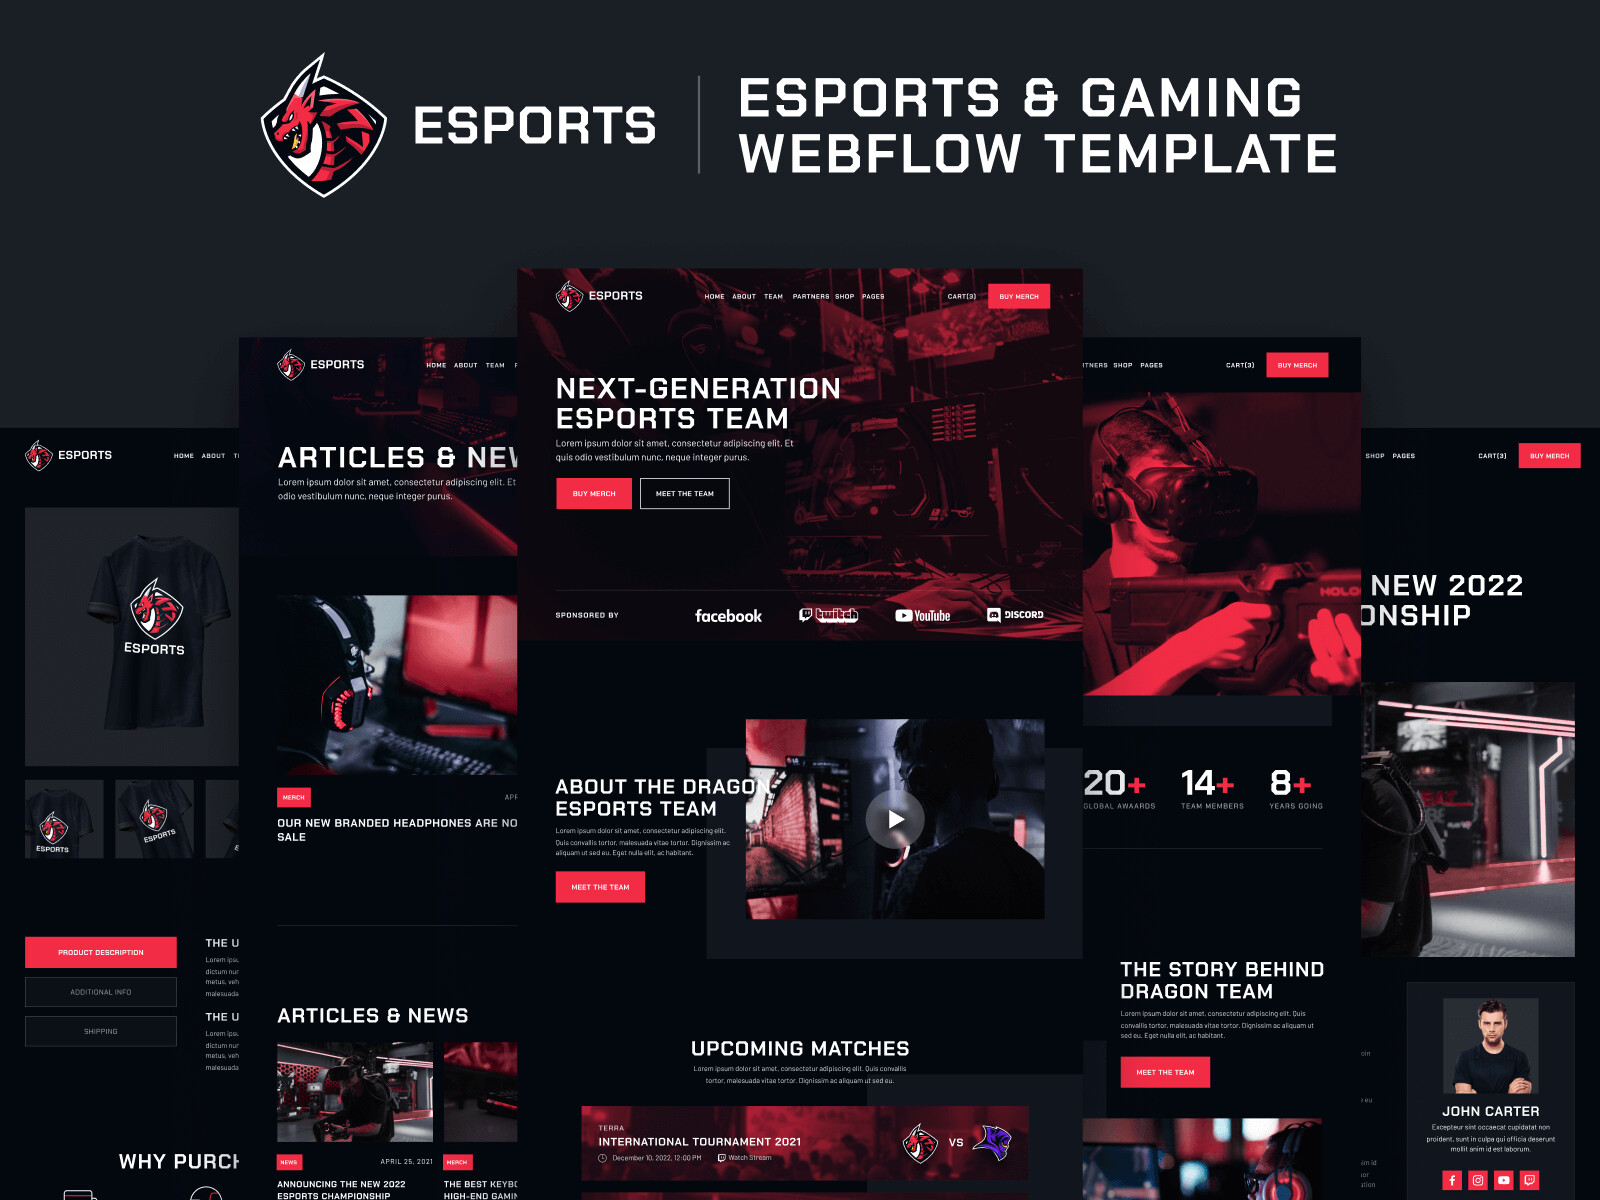 Videogame X - Videogame Webflow Website Template